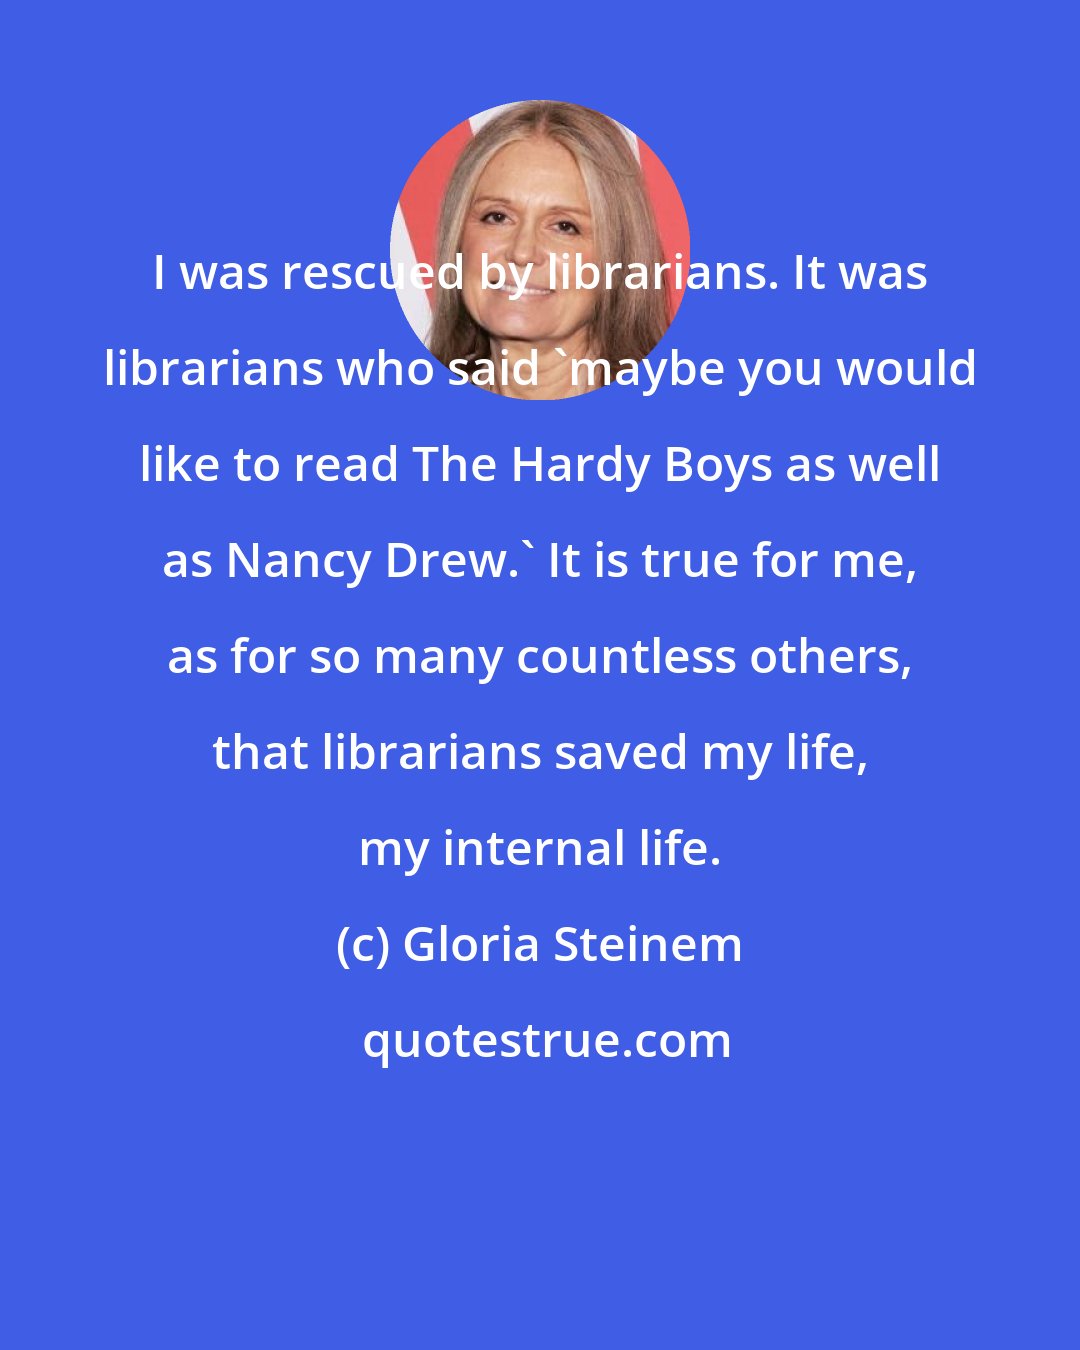 Gloria Steinem: I was rescued by librarians. It was librarians who said 'maybe you would like to read The Hardy Boys as well as Nancy Drew.' It is true for me, as for so many countless others, that librarians saved my life, my internal life.